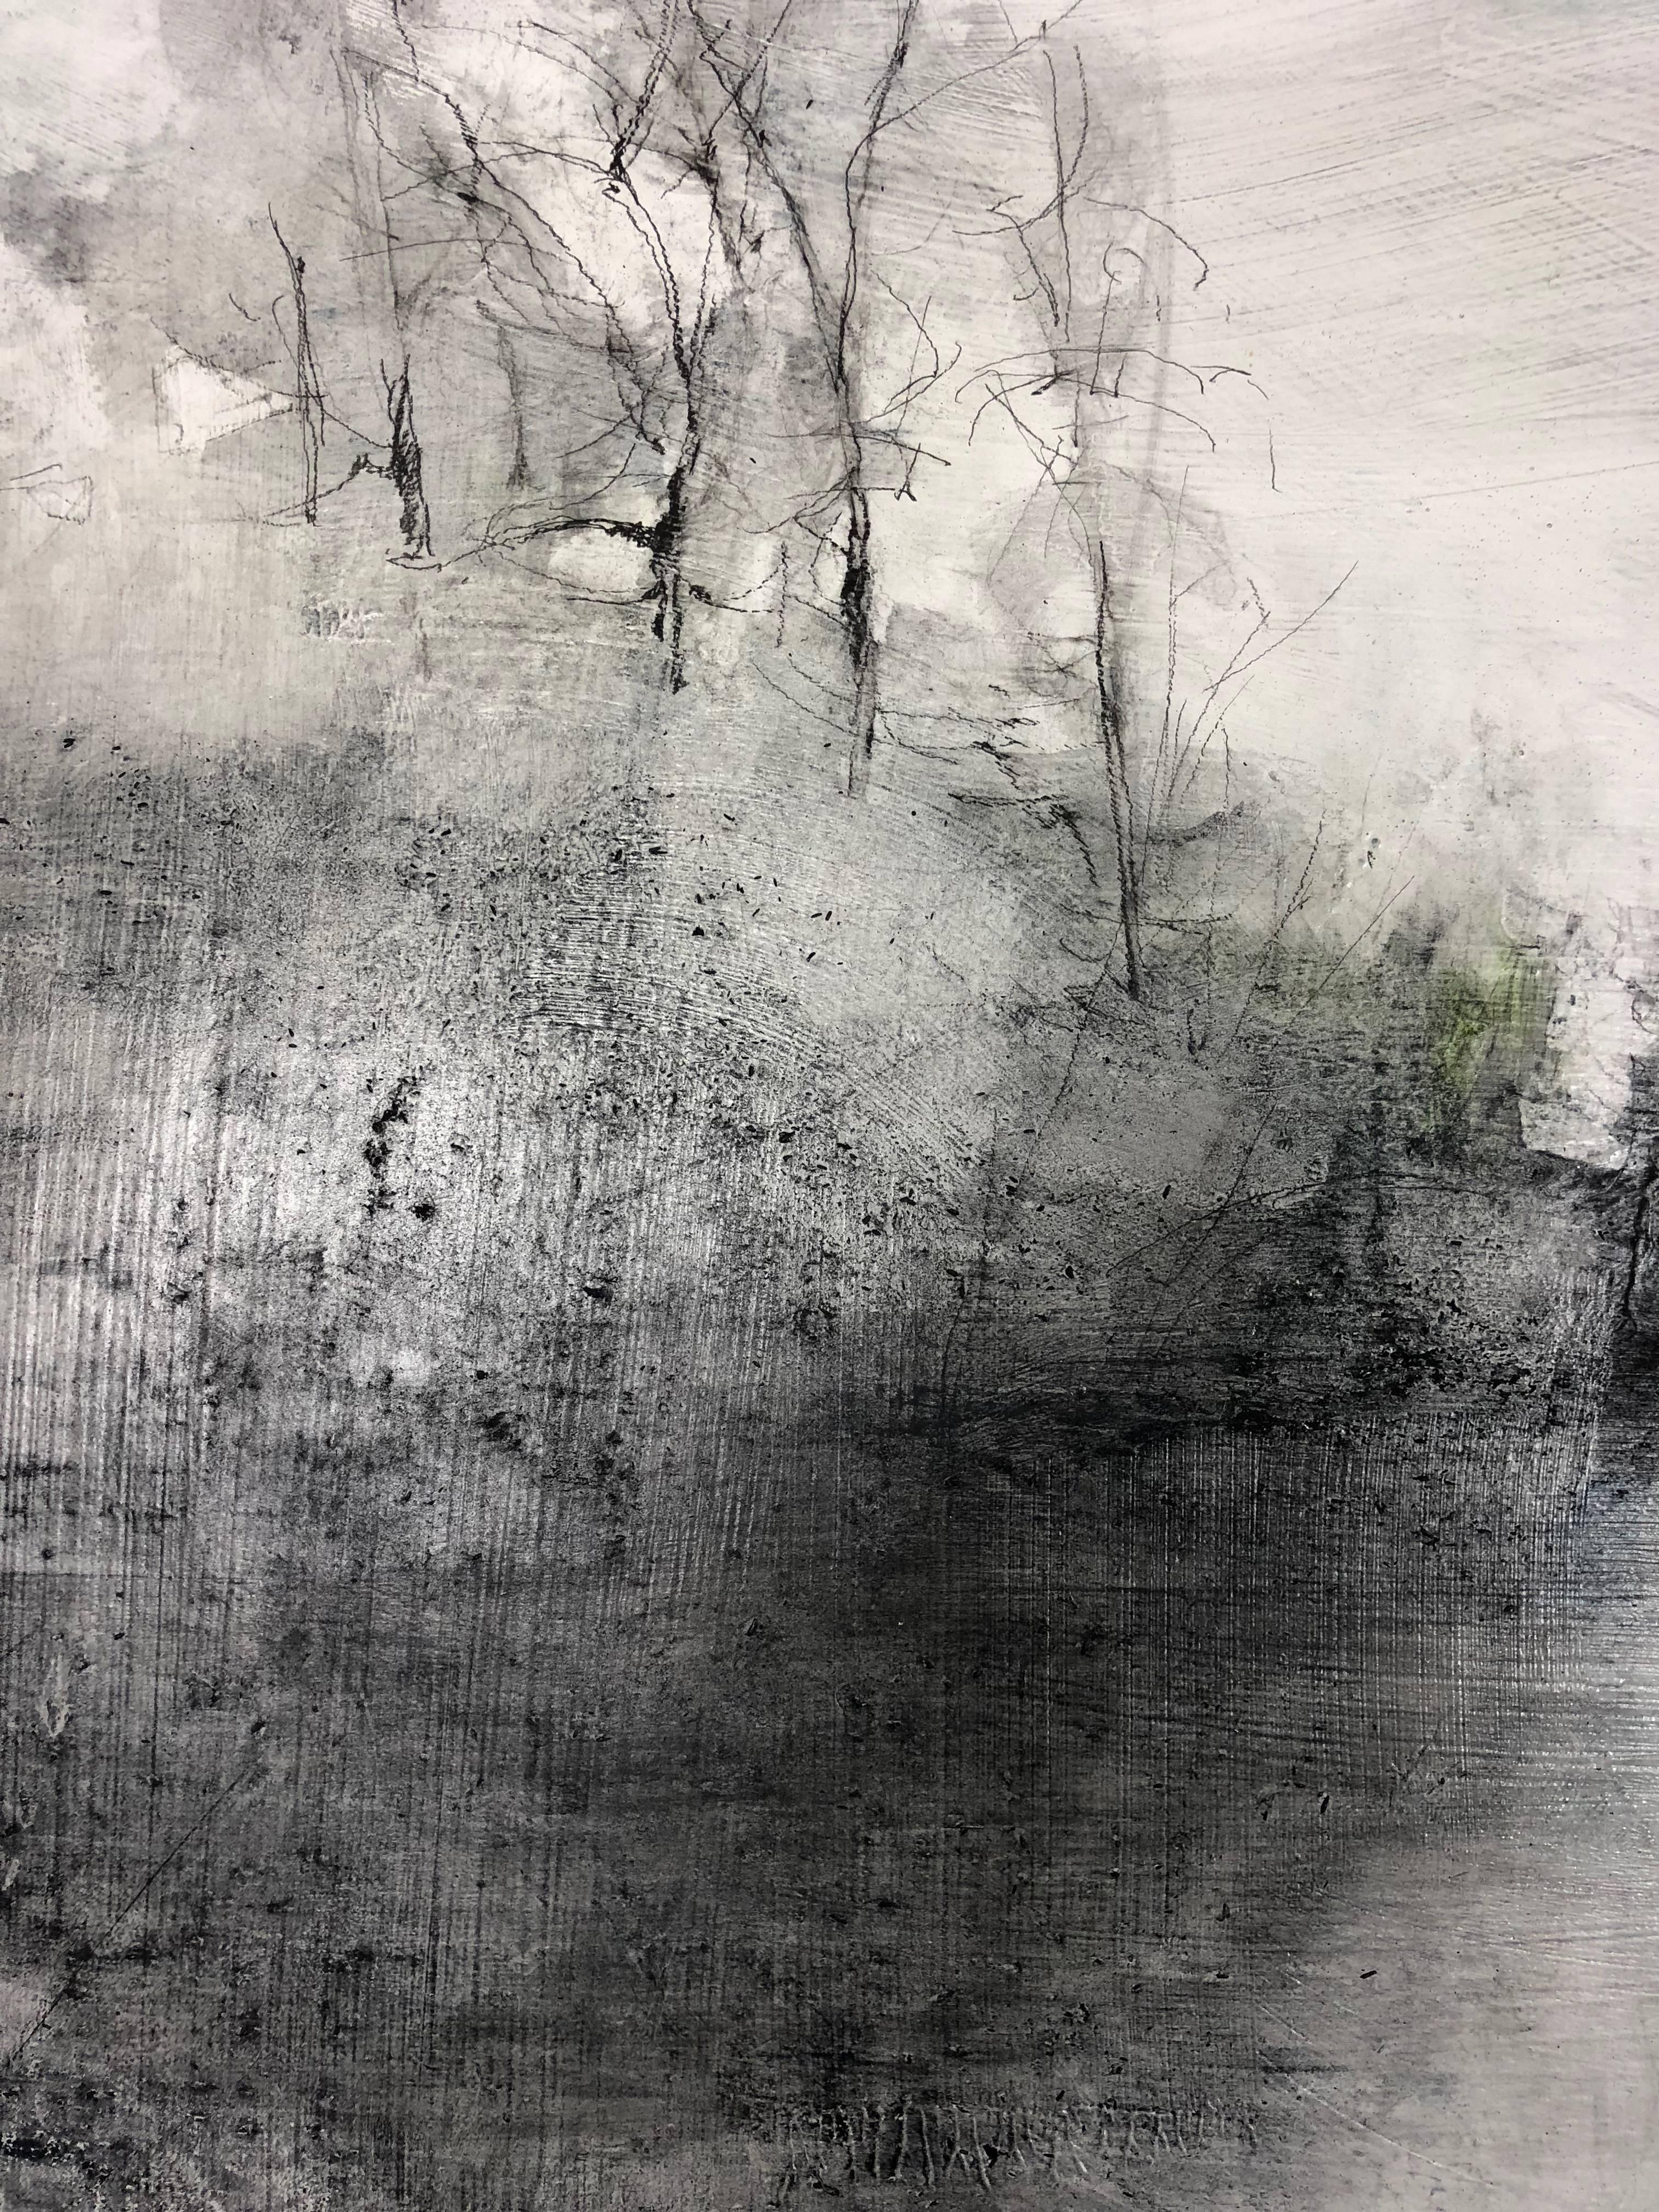 How Long Can a Moment Last - Gray Landscape Painting by Laurie Steen